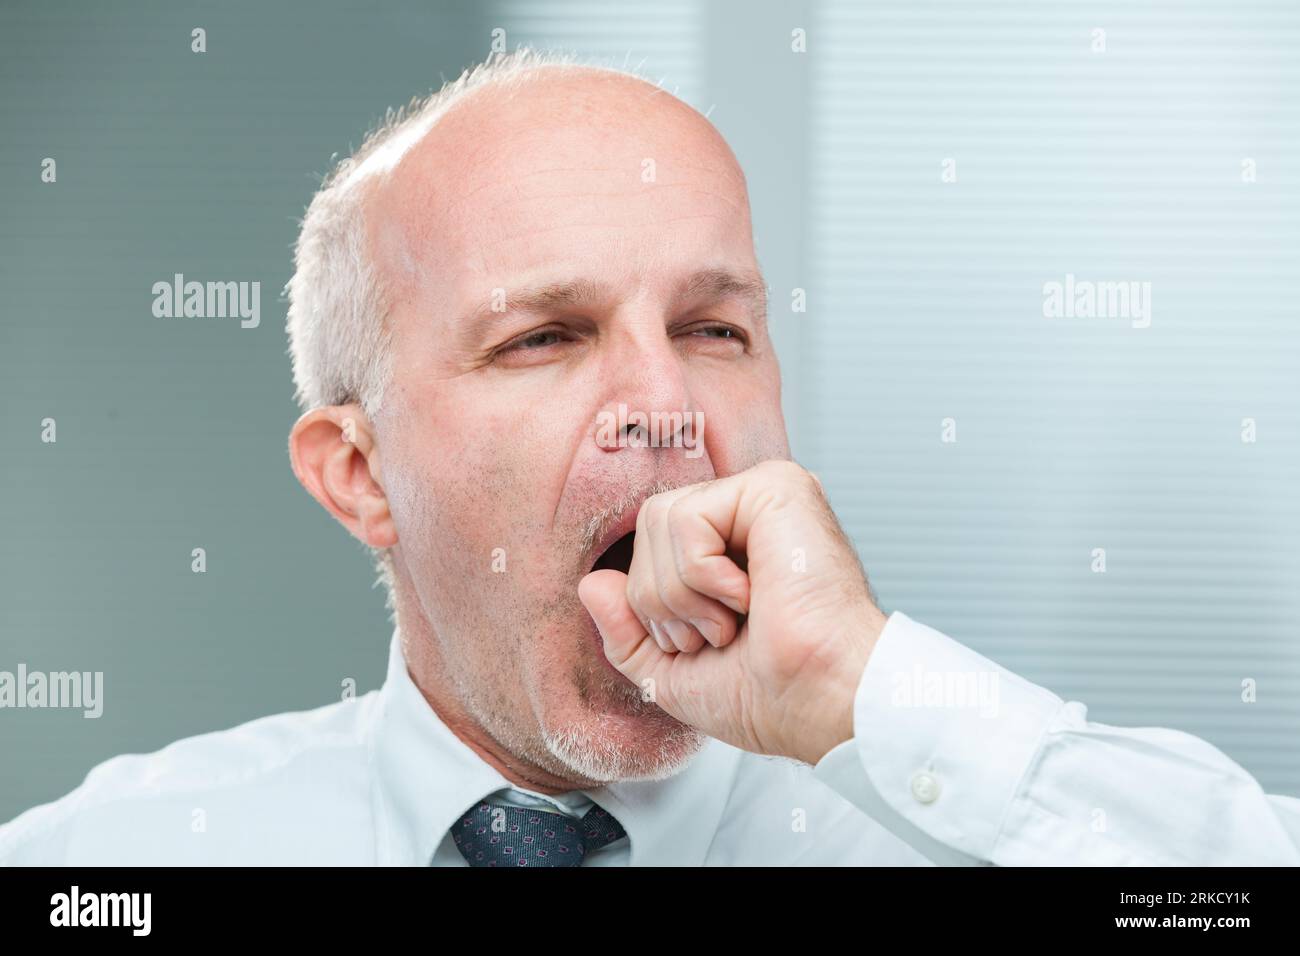 Aged clerk yawns, covering his mouth ineffectively. The close-up reveals a man tired, perhaps bored, needing oxygen or hinting at a transition. Dresse Stock Photo